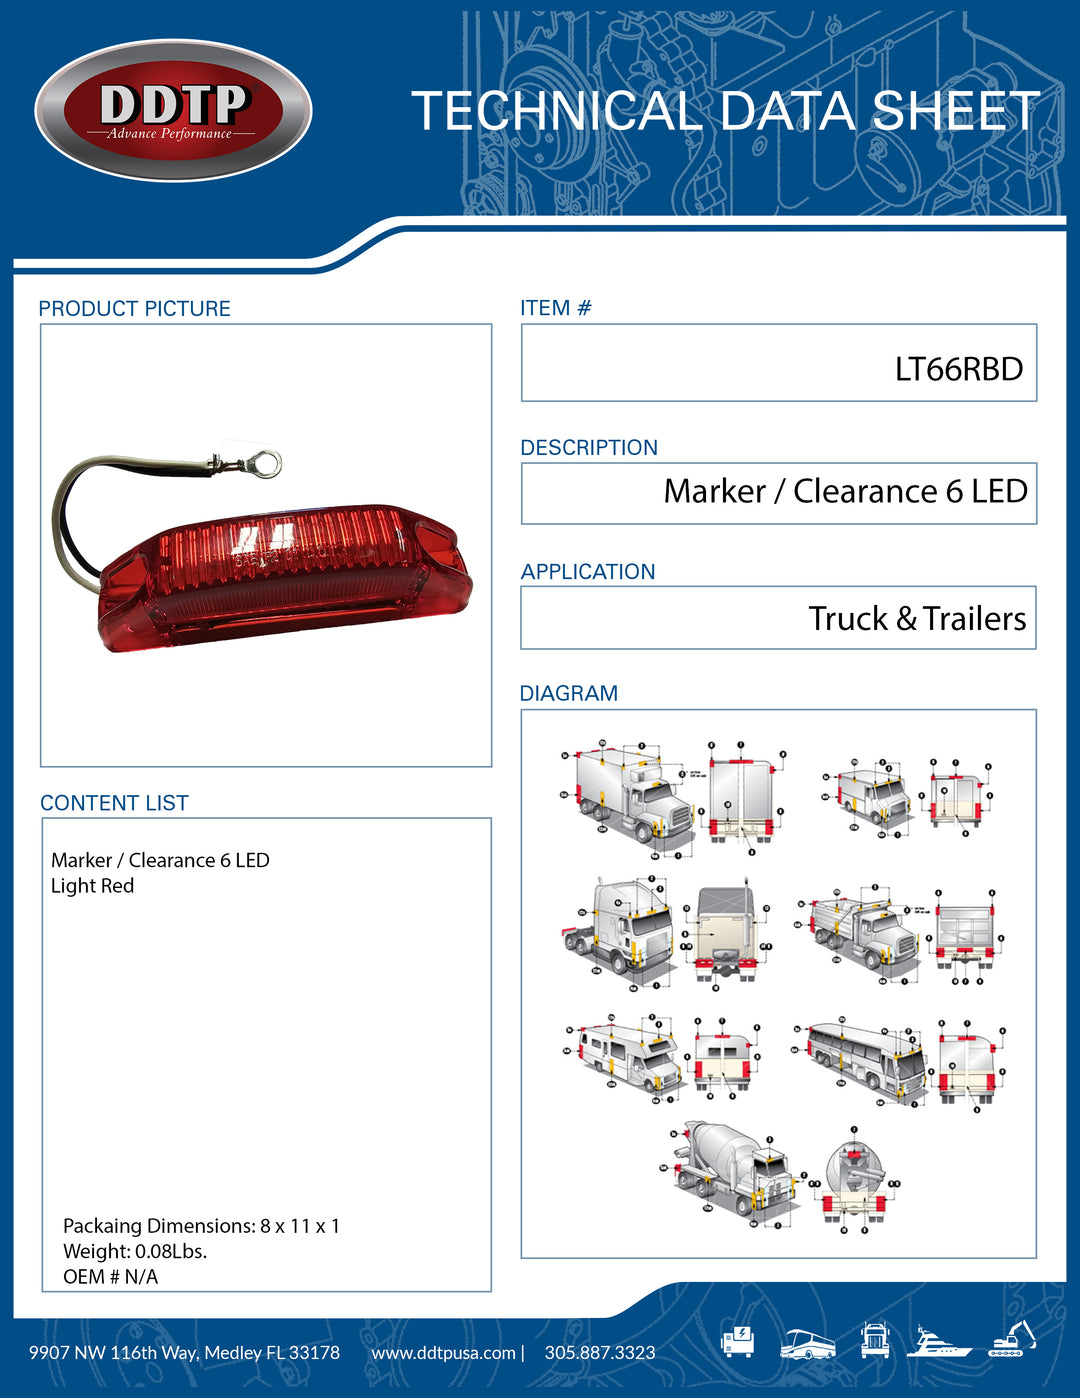 Marker / Clearance 6 LED Light Red